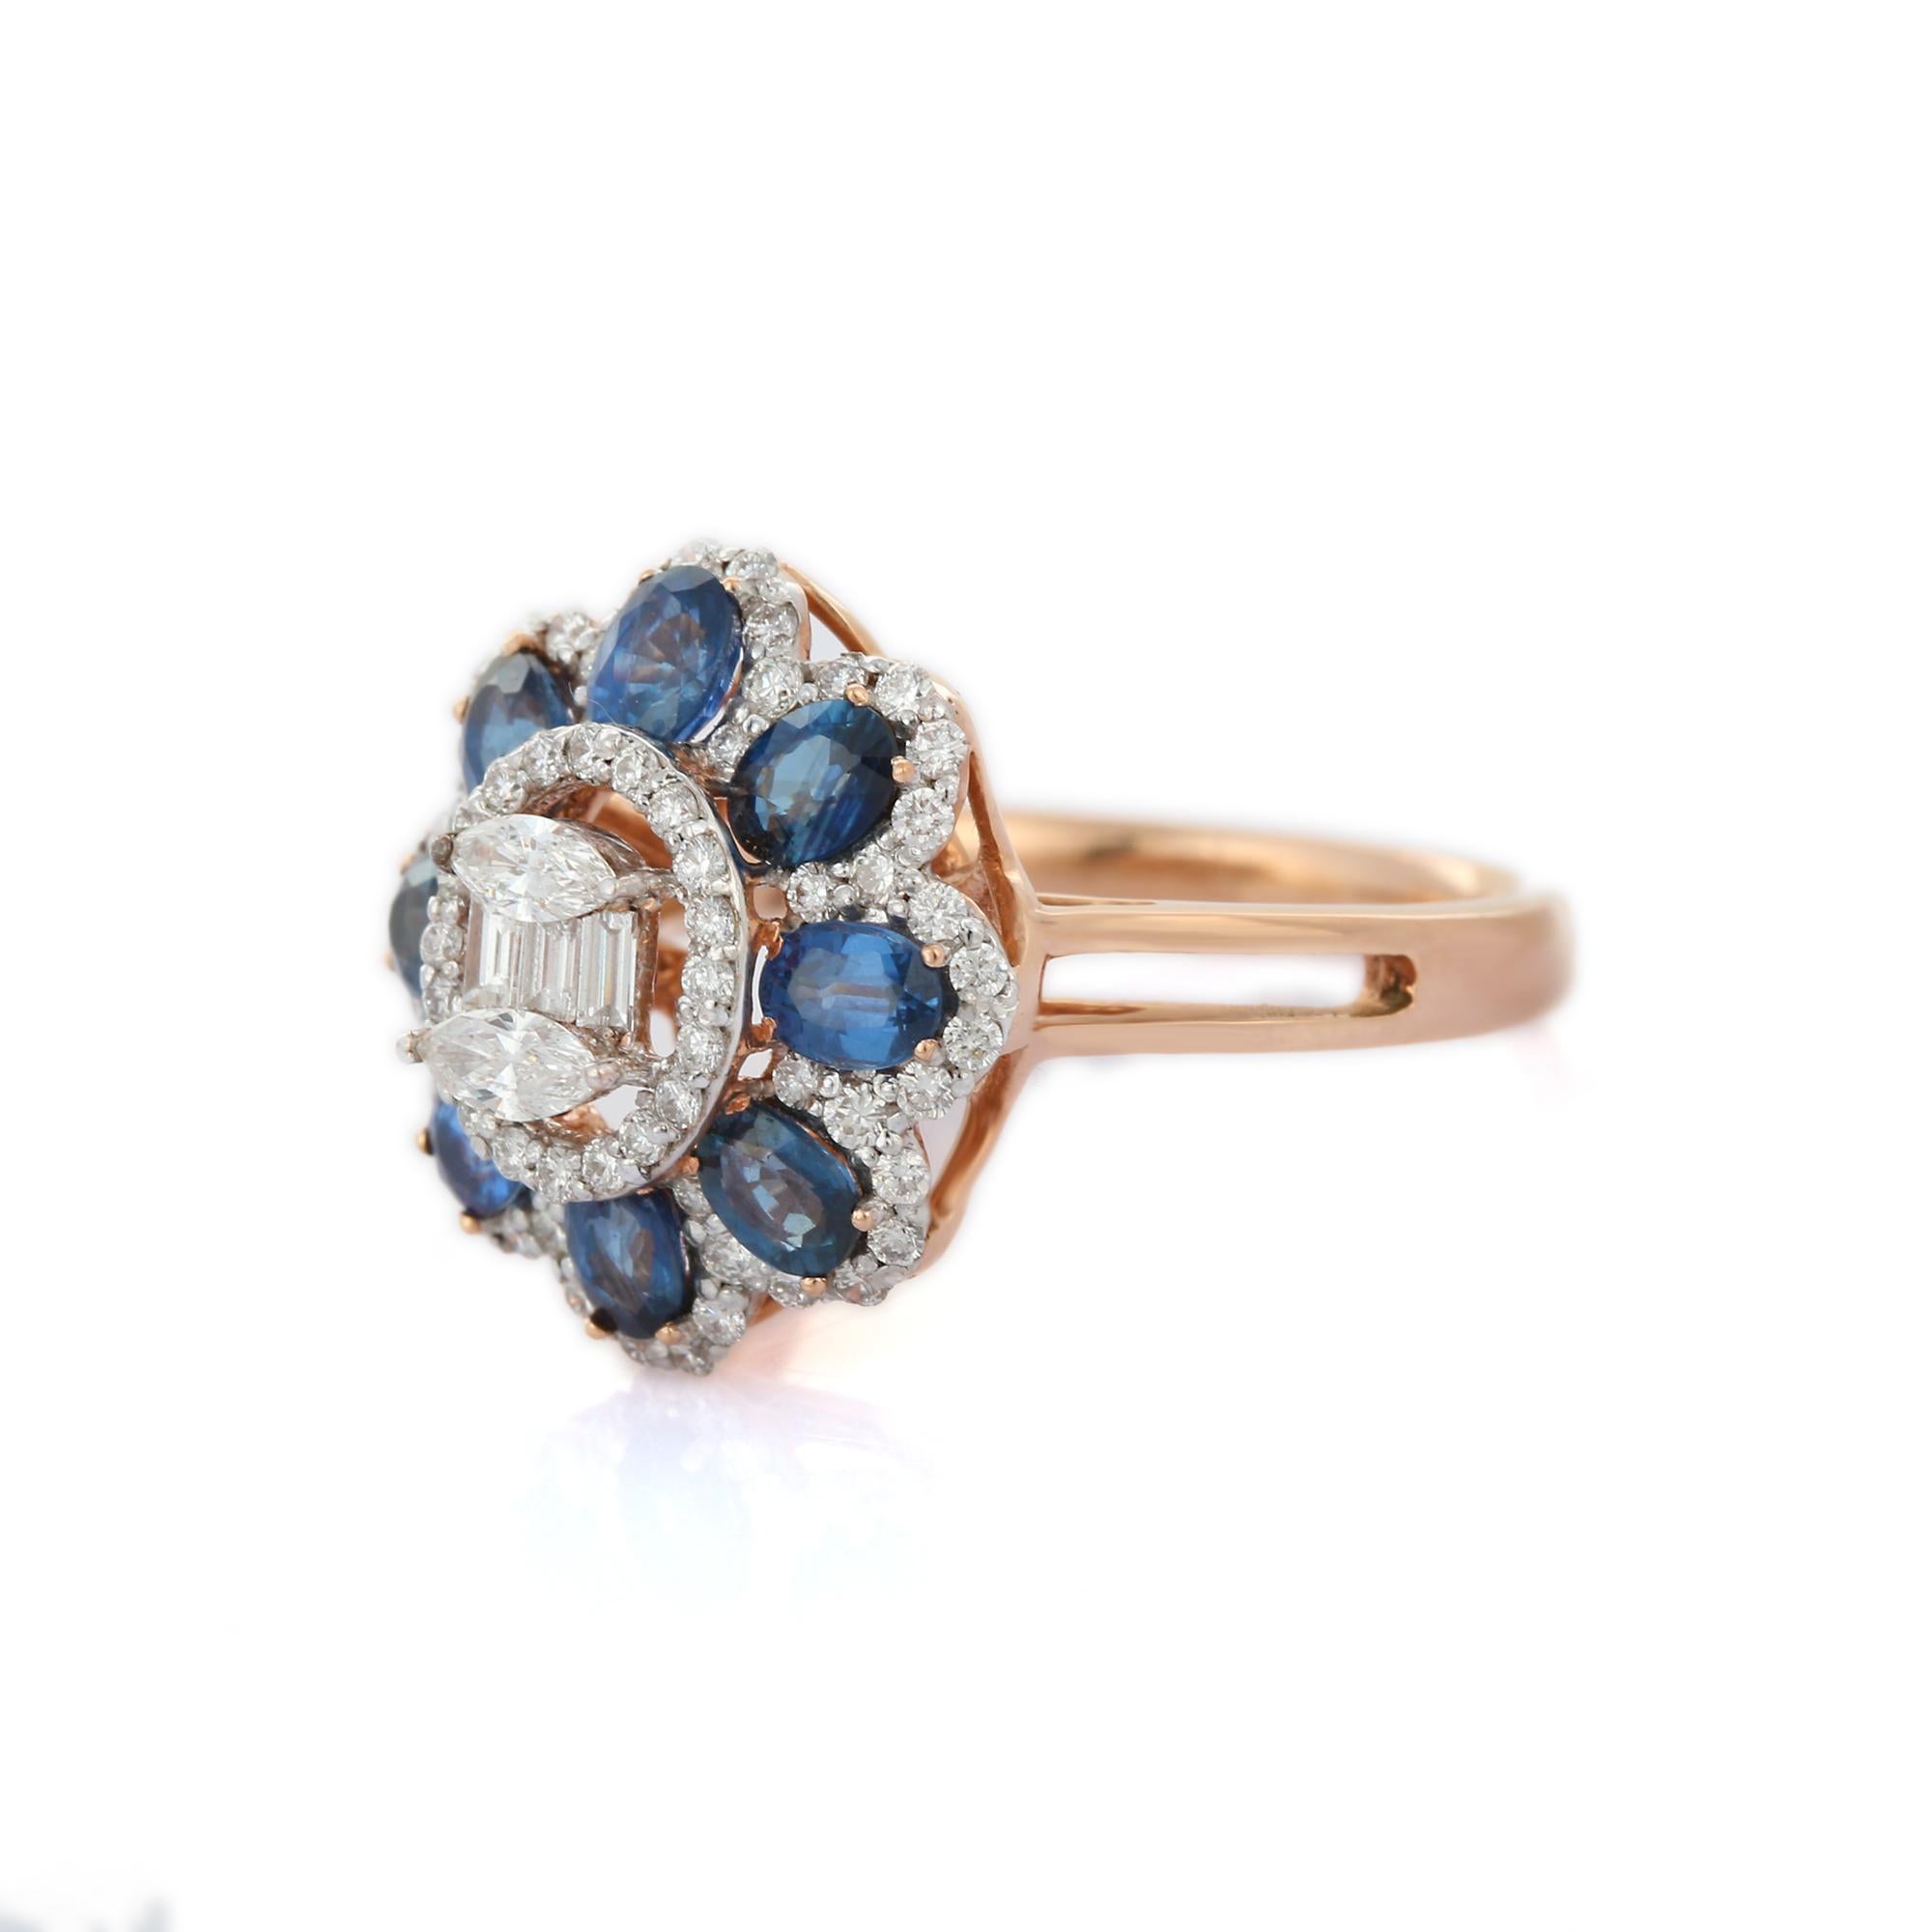 For Sale:  18K Solid Rose Gold 1.76 ct Sapphire Diamond Big Flower Wedding Ring 3